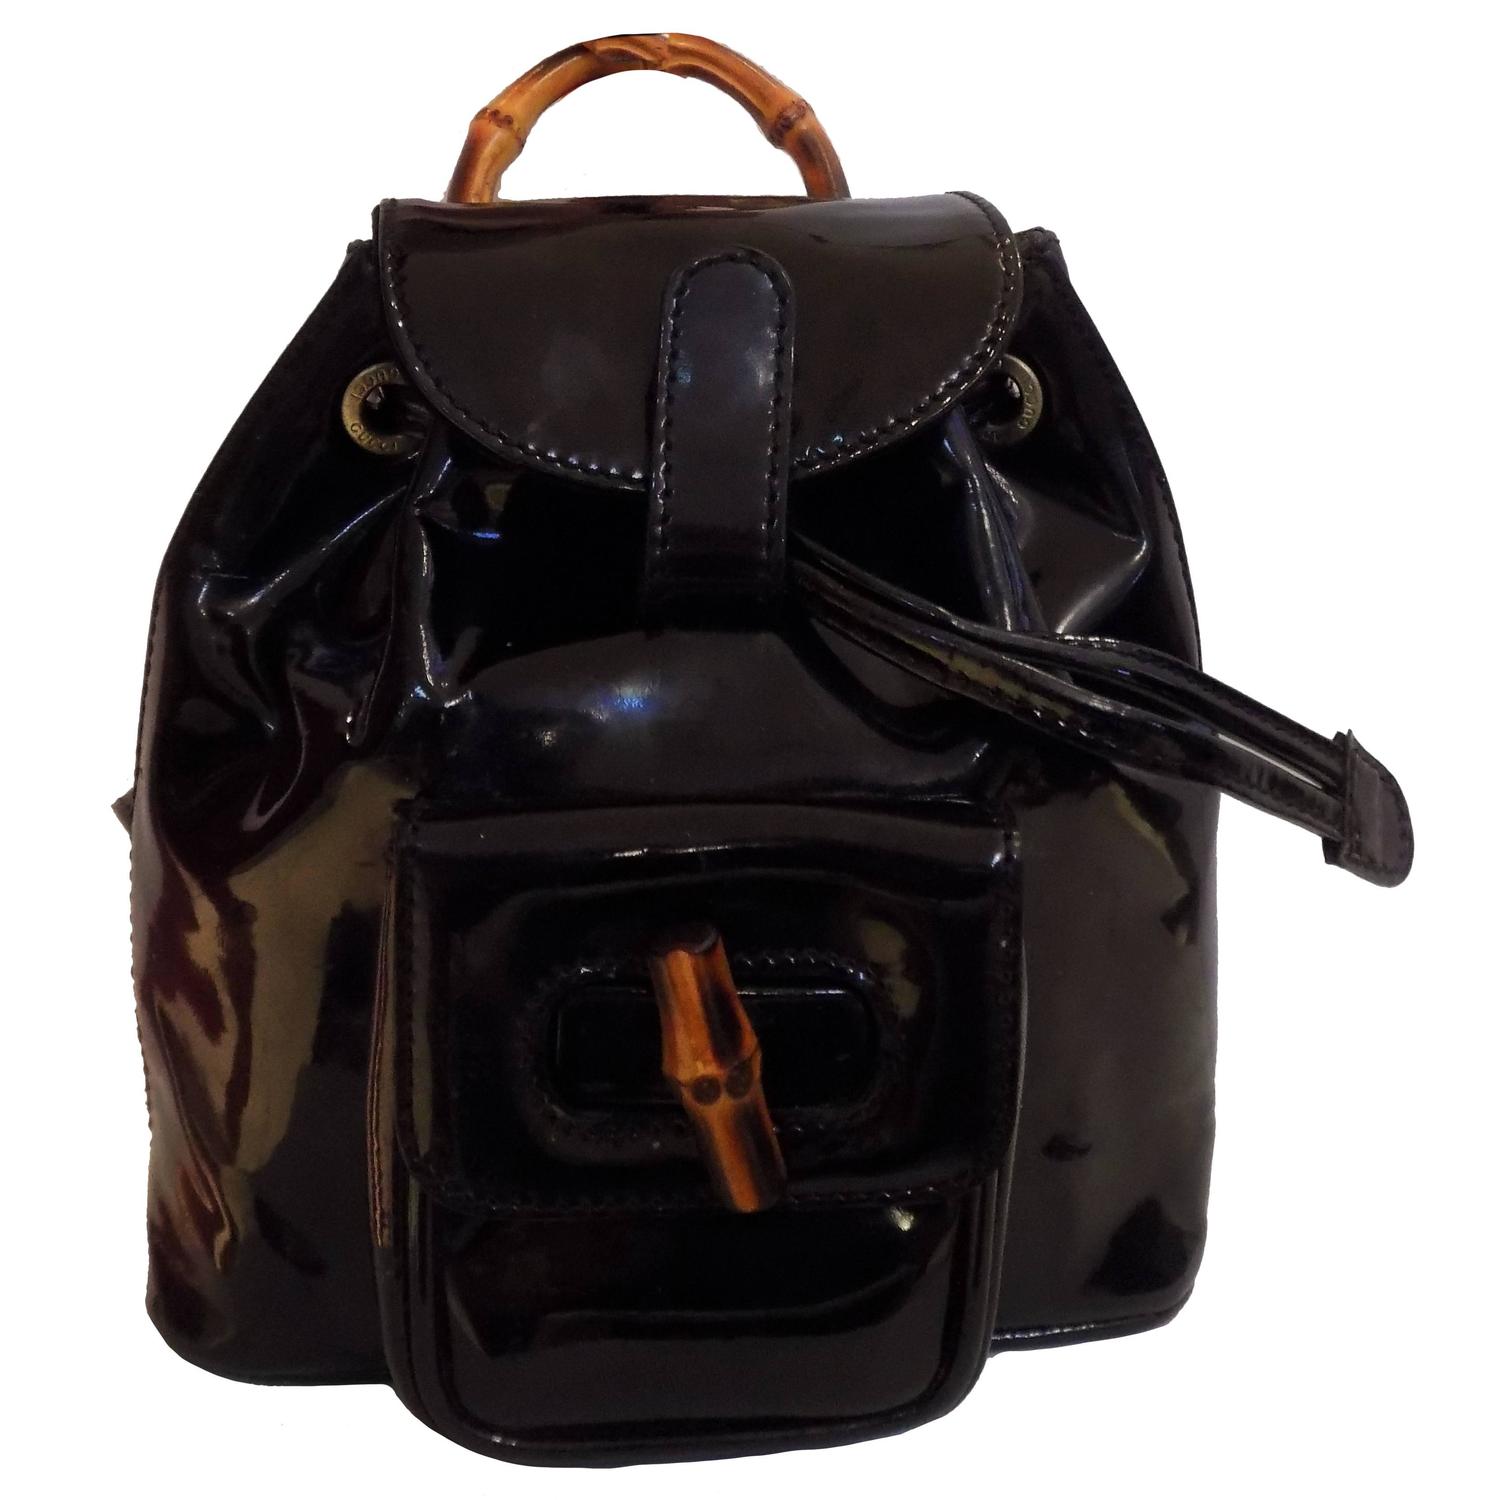 Gucci Bamboo Black Varnish Leather Small Backpack For Sale at 1stdibs